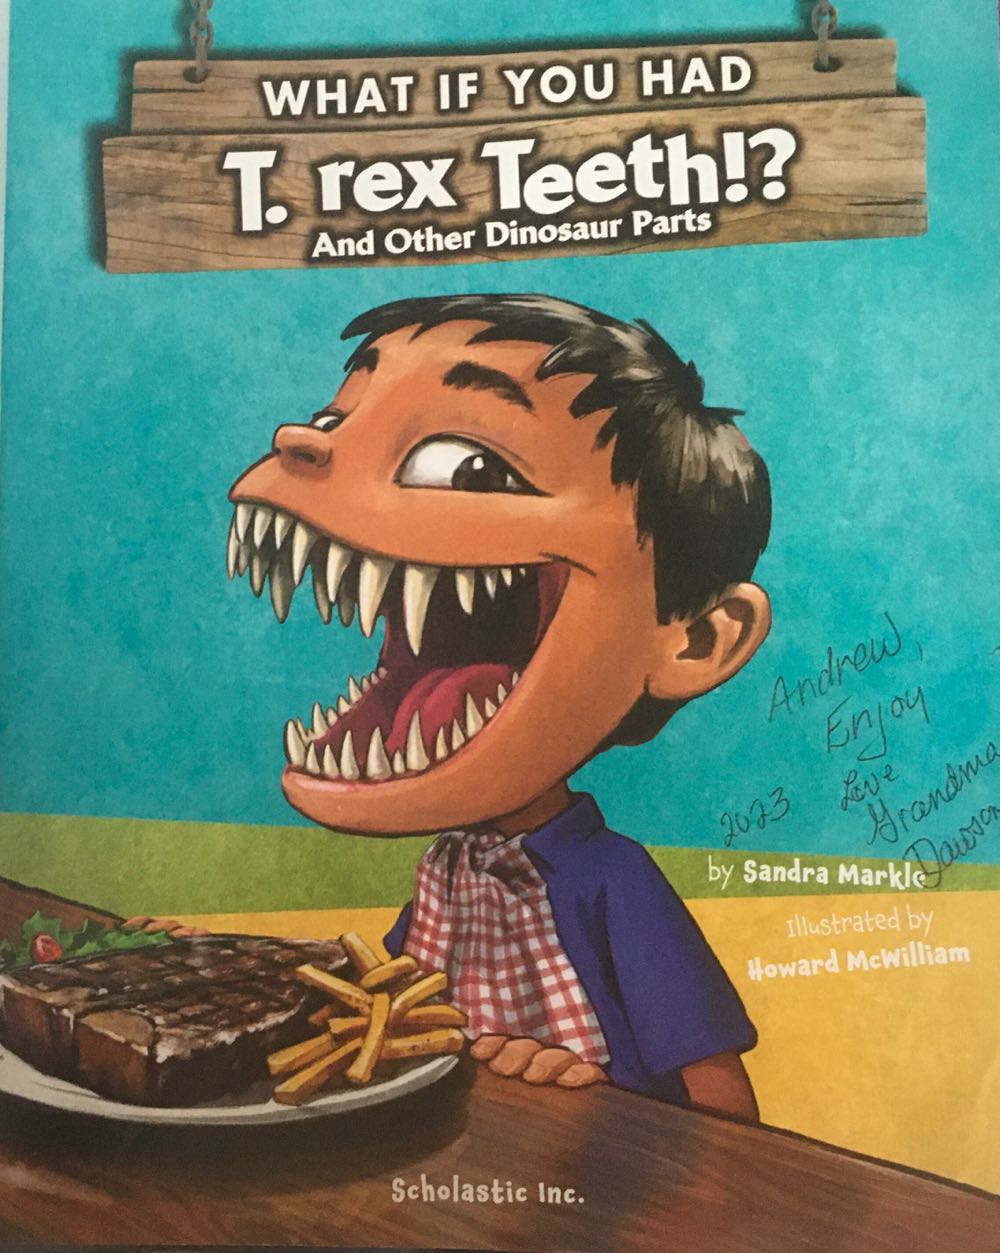 What If You Had T. Rex Teeth!? - Sandra Markle (Scholastic Inc. - Paperback) book collectible [Barcode 9781338271393] - Main Image 3